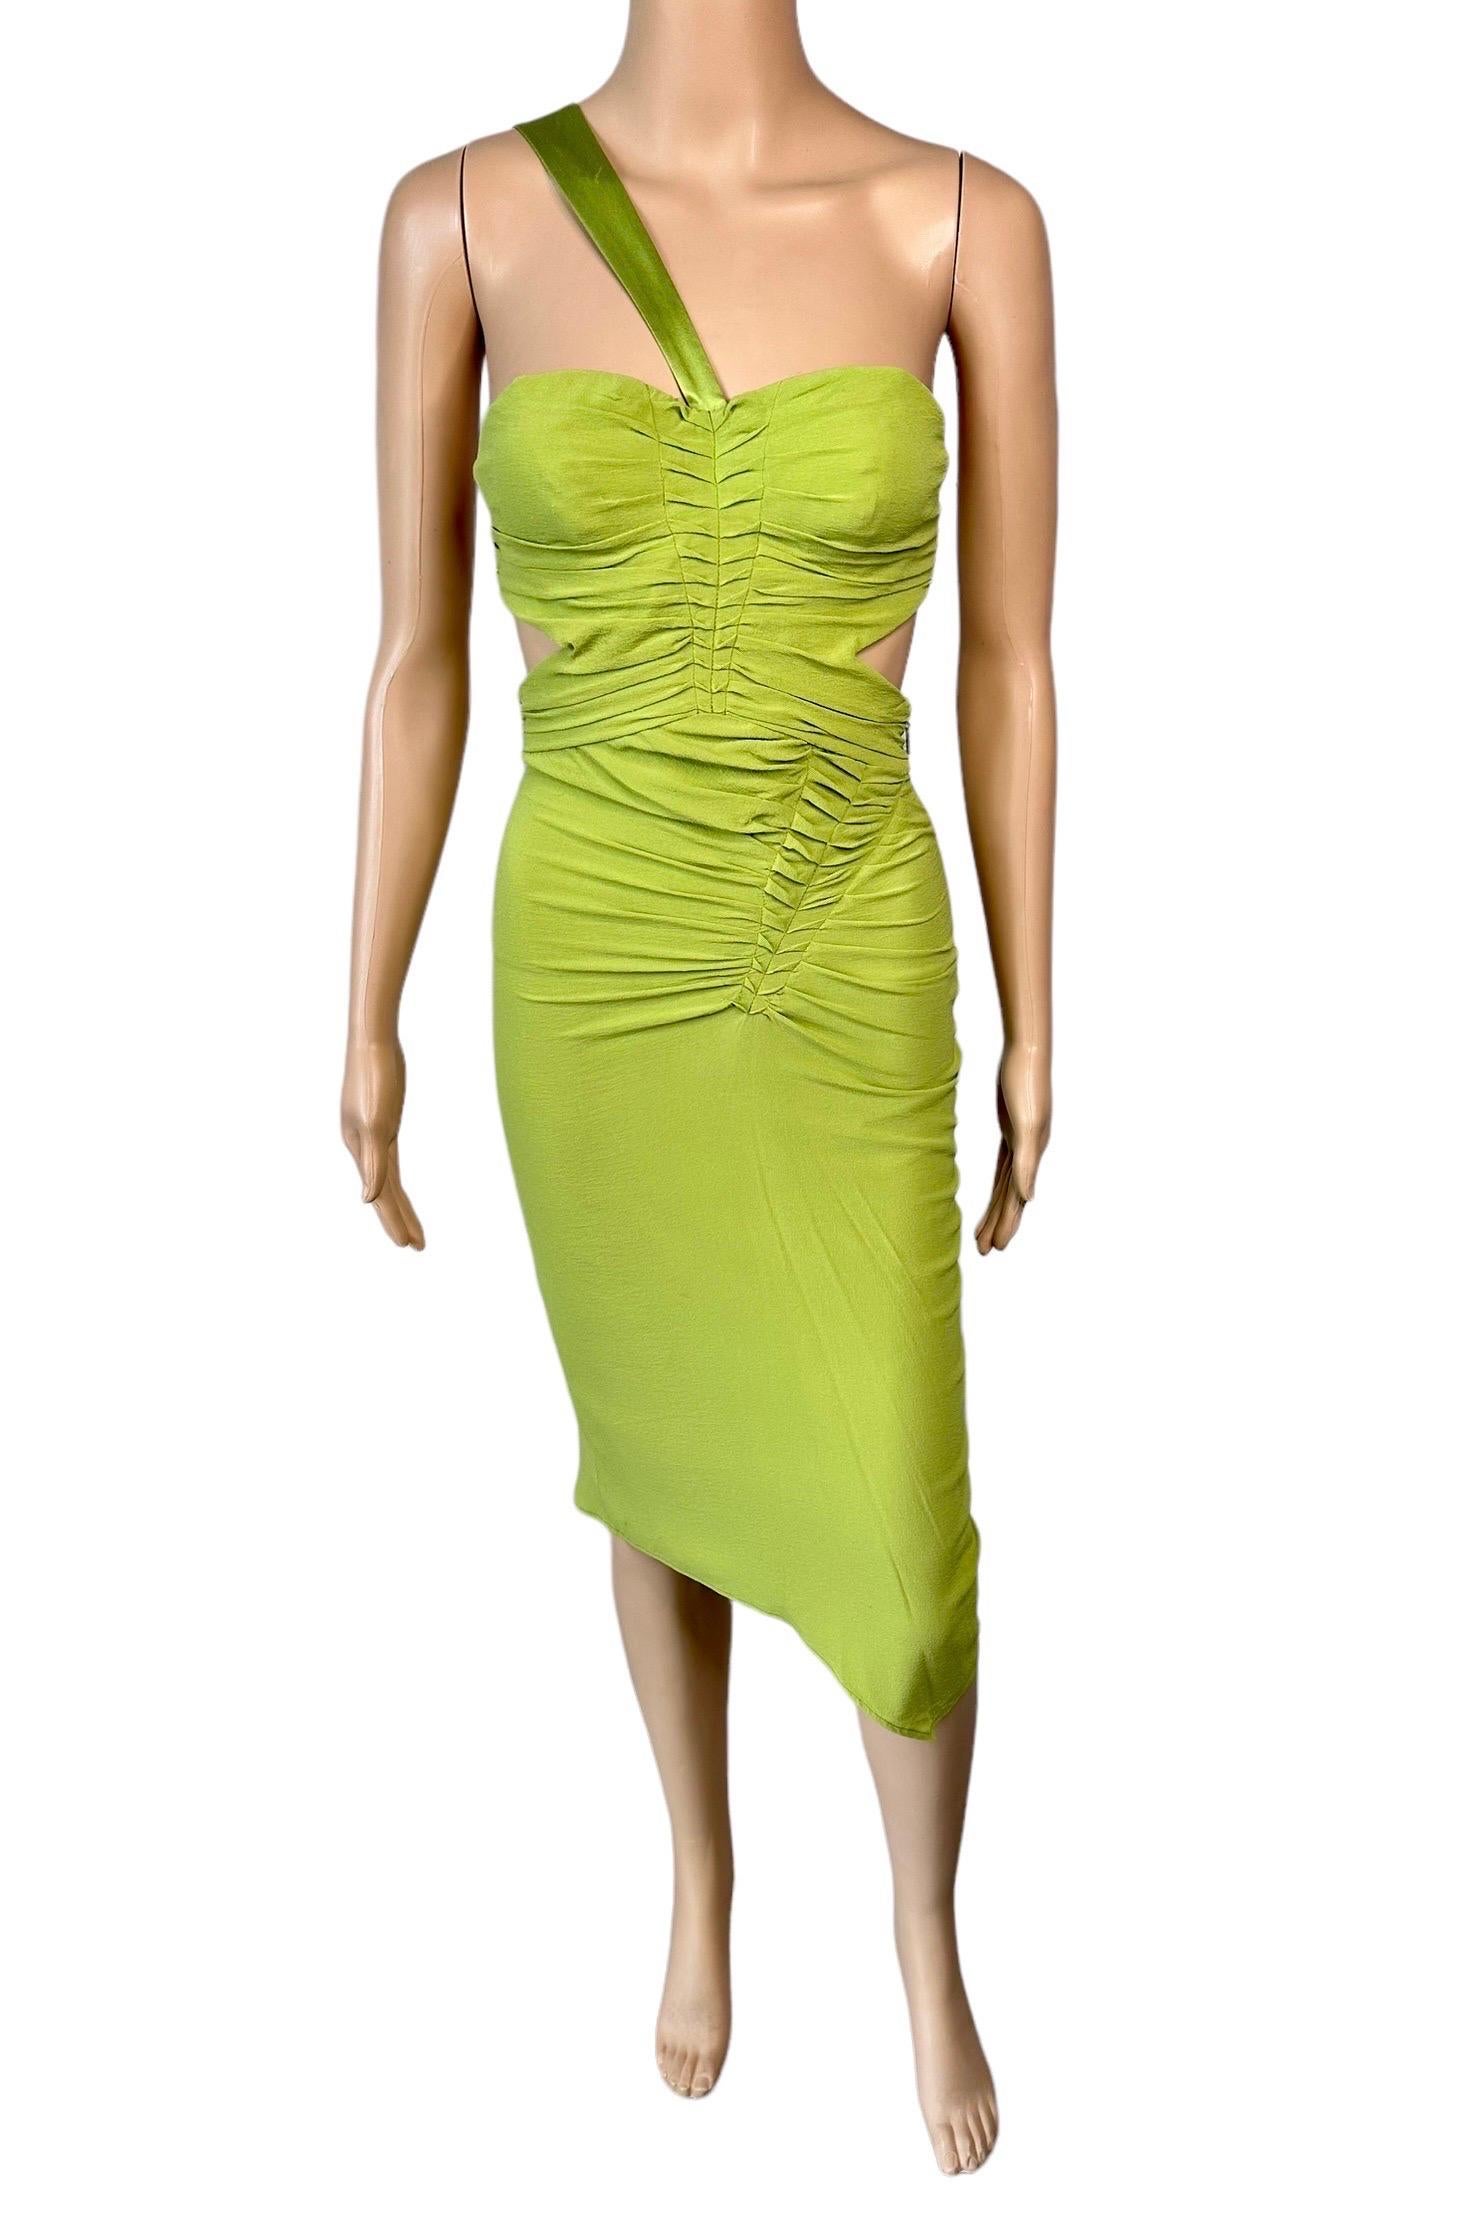 Tom Ford for Gucci F/W 2003 Bustier Bra Cutout Bodycon Dress  In Good Condition For Sale In Naples, FL